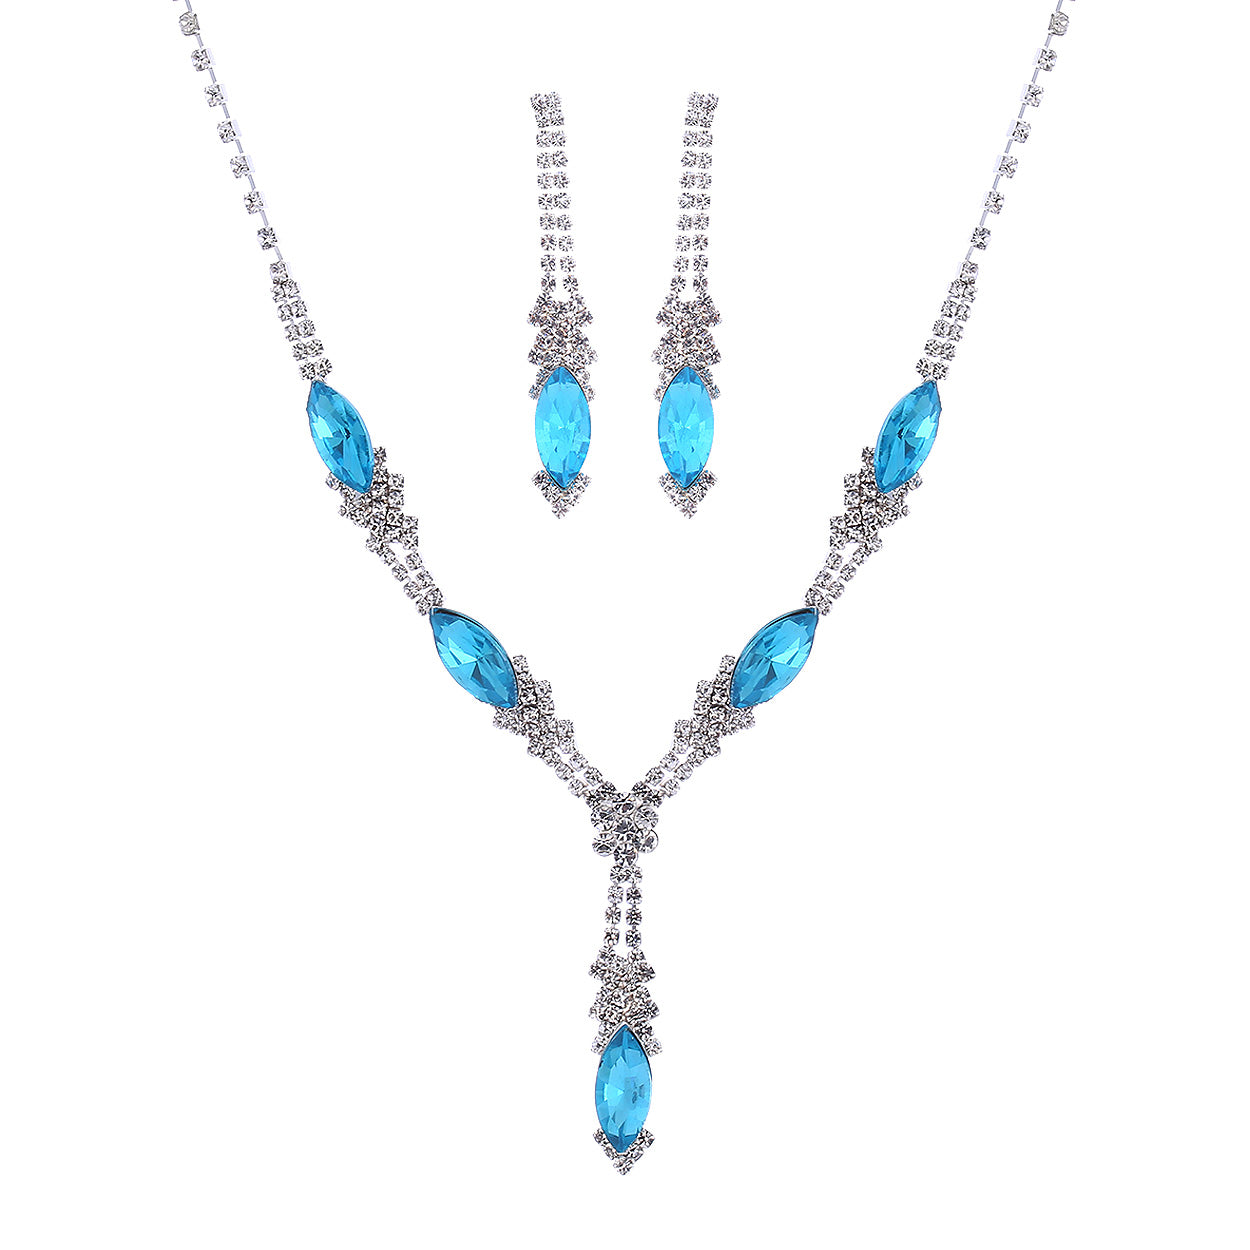 Crystal Rhinestone Marquise Bridal Necklace and Earrings Set (Blue Zircon)